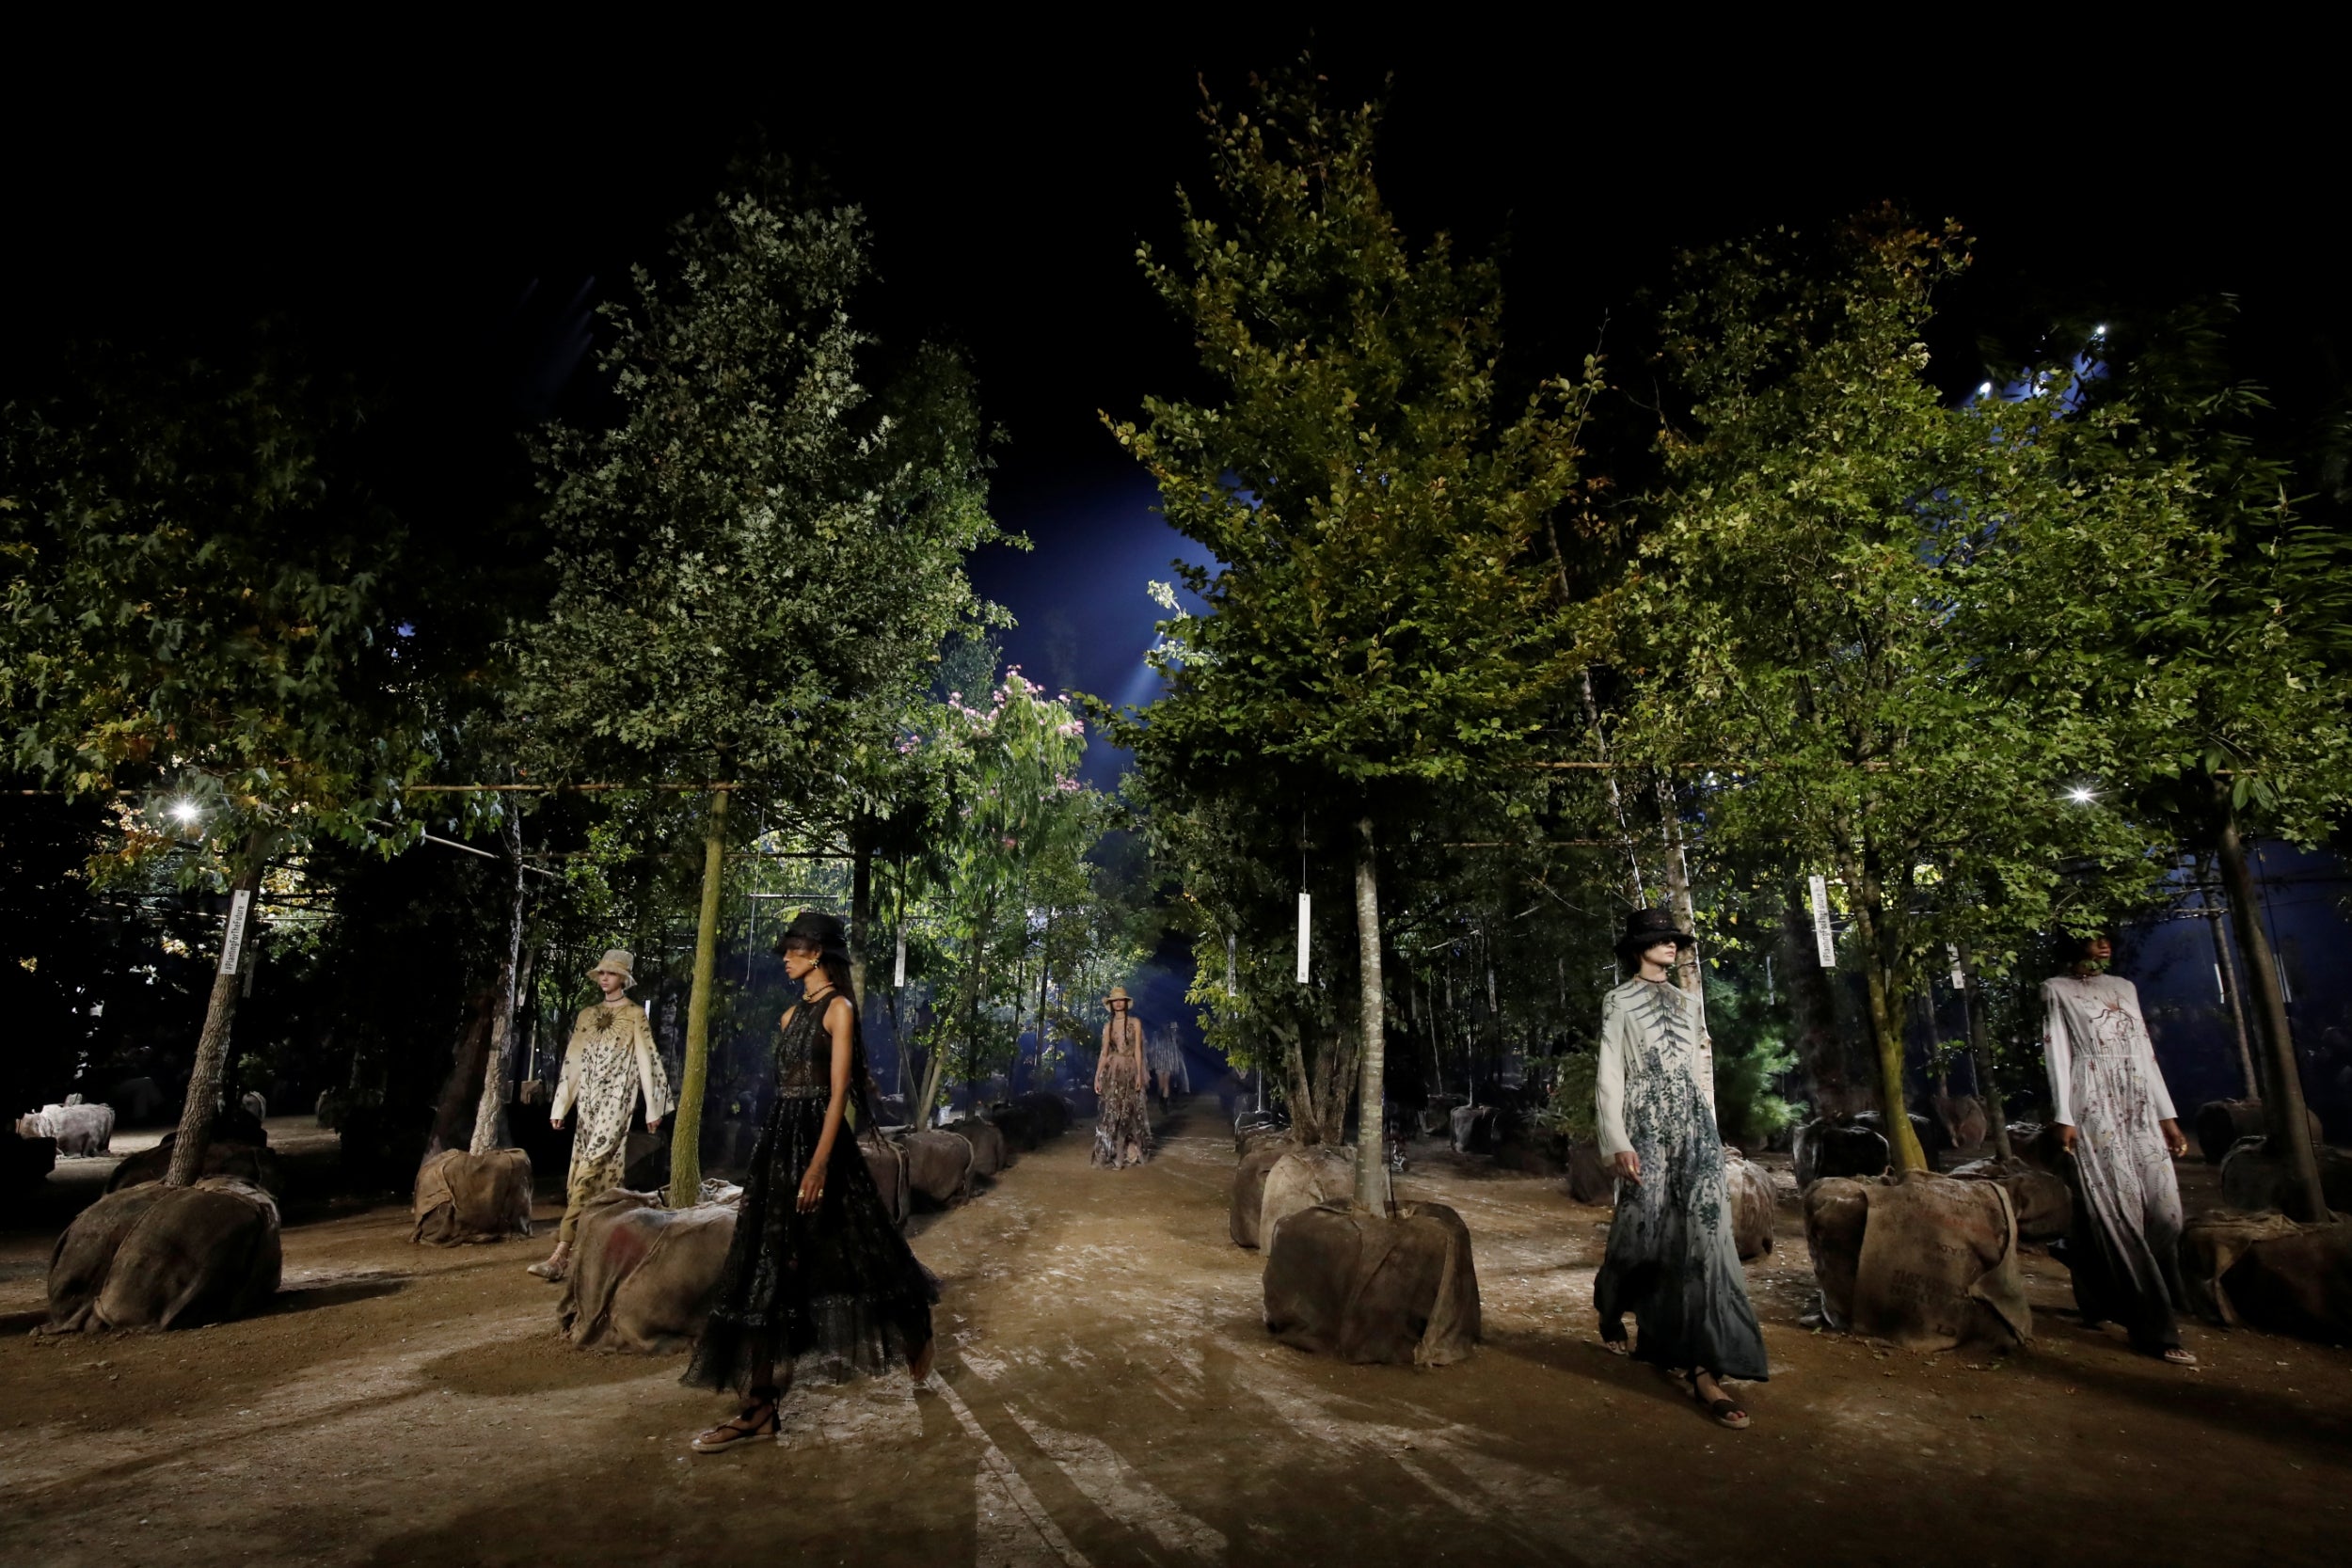 Dior presented a green show space decorated with 164 trees